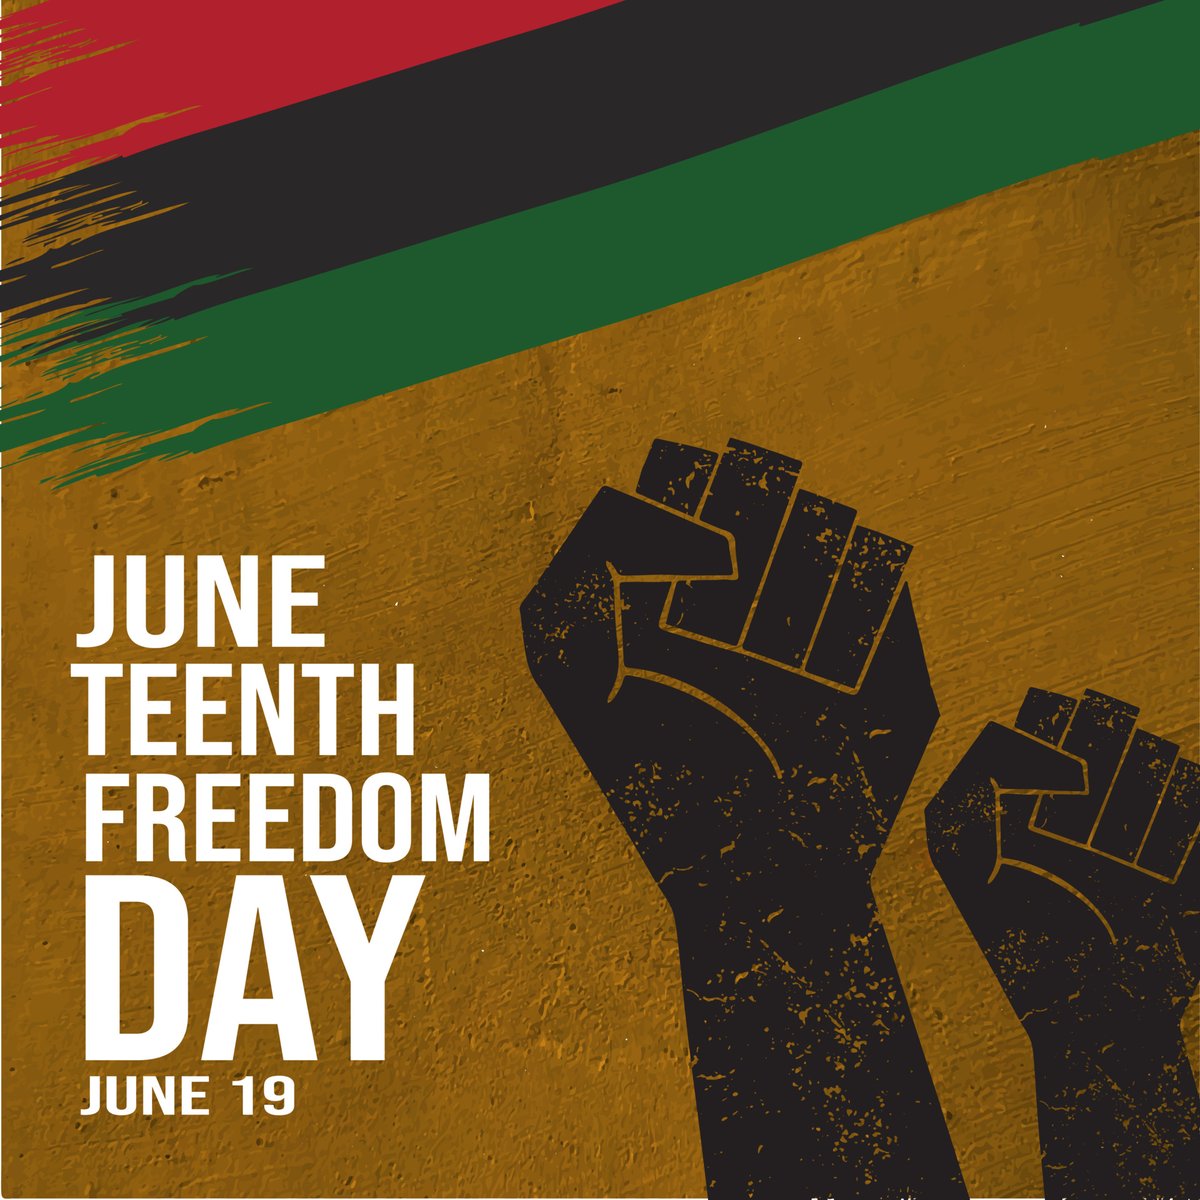 Happy Juneteenth! 🎉 Celebrate this important day with your family and friends. 💞 Let's honor the freedom our ancestors fought for, while continuing to work towards liberty and justice for all. 🙌 #Juneteenth #Freedom #EquityForAll #communityaction #powerofchange #albanyny